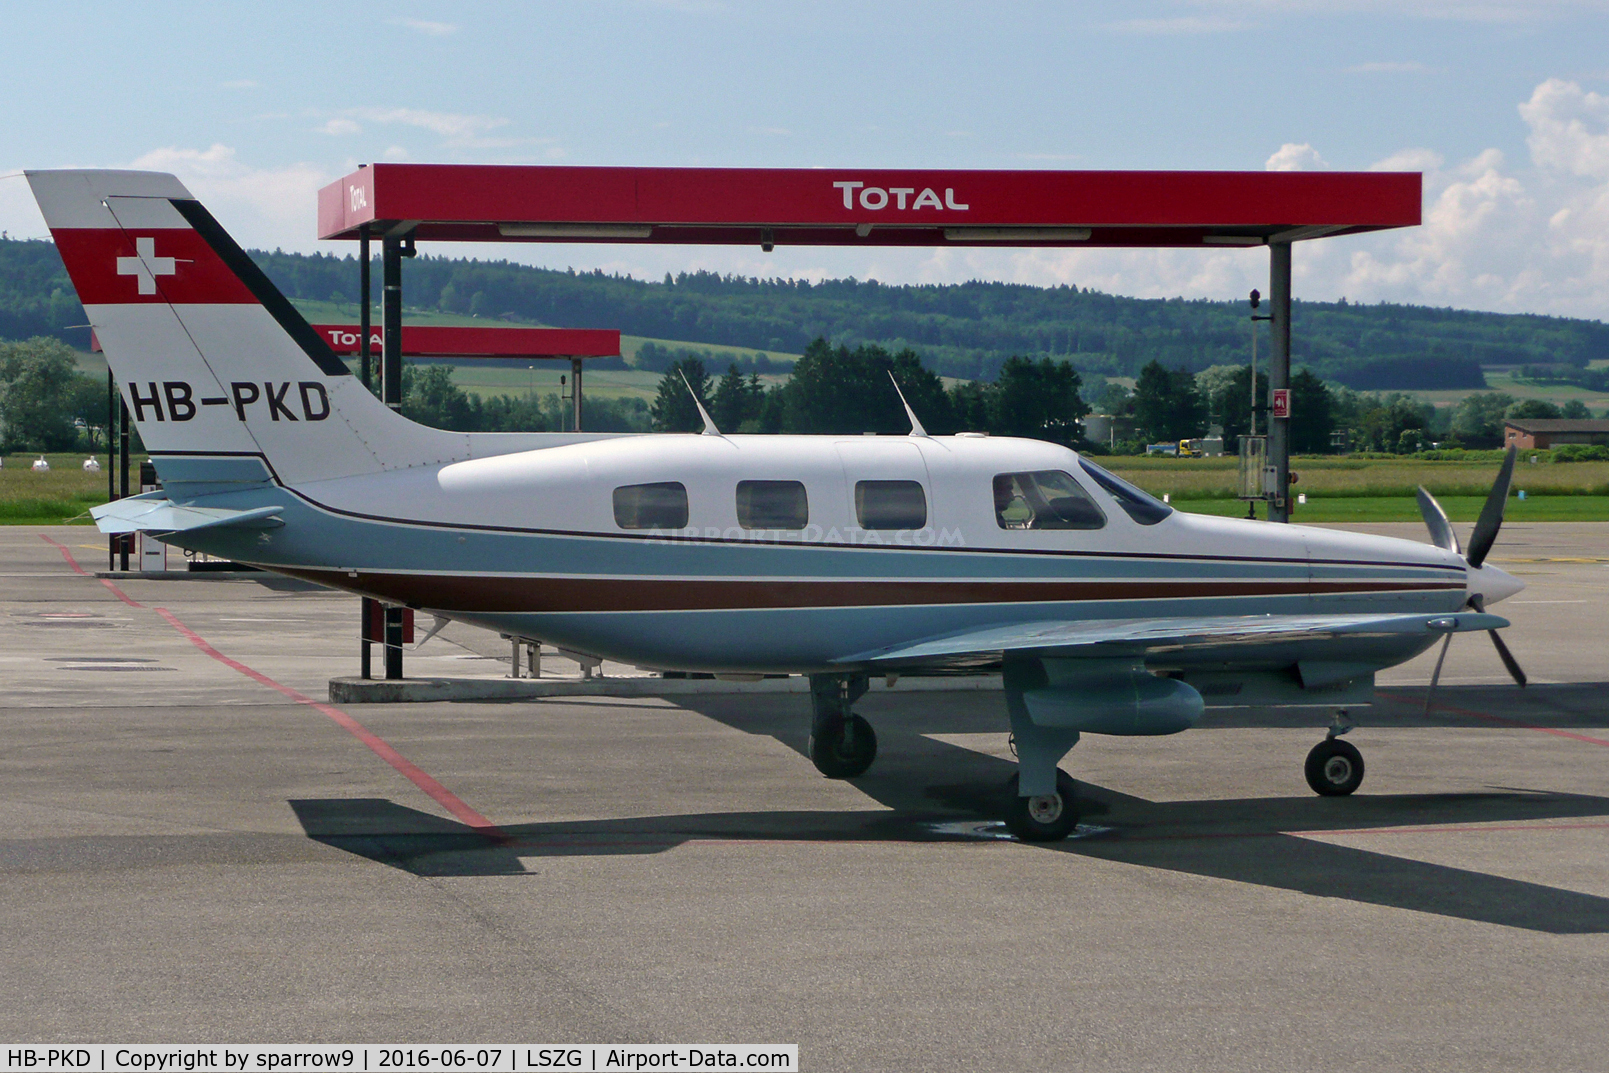 HB-PKD, 1986 Piper PA-46-310P Malibu C/N 46-8608028, Refuelling at Grenchen. HB-registered since 1986-08-11.